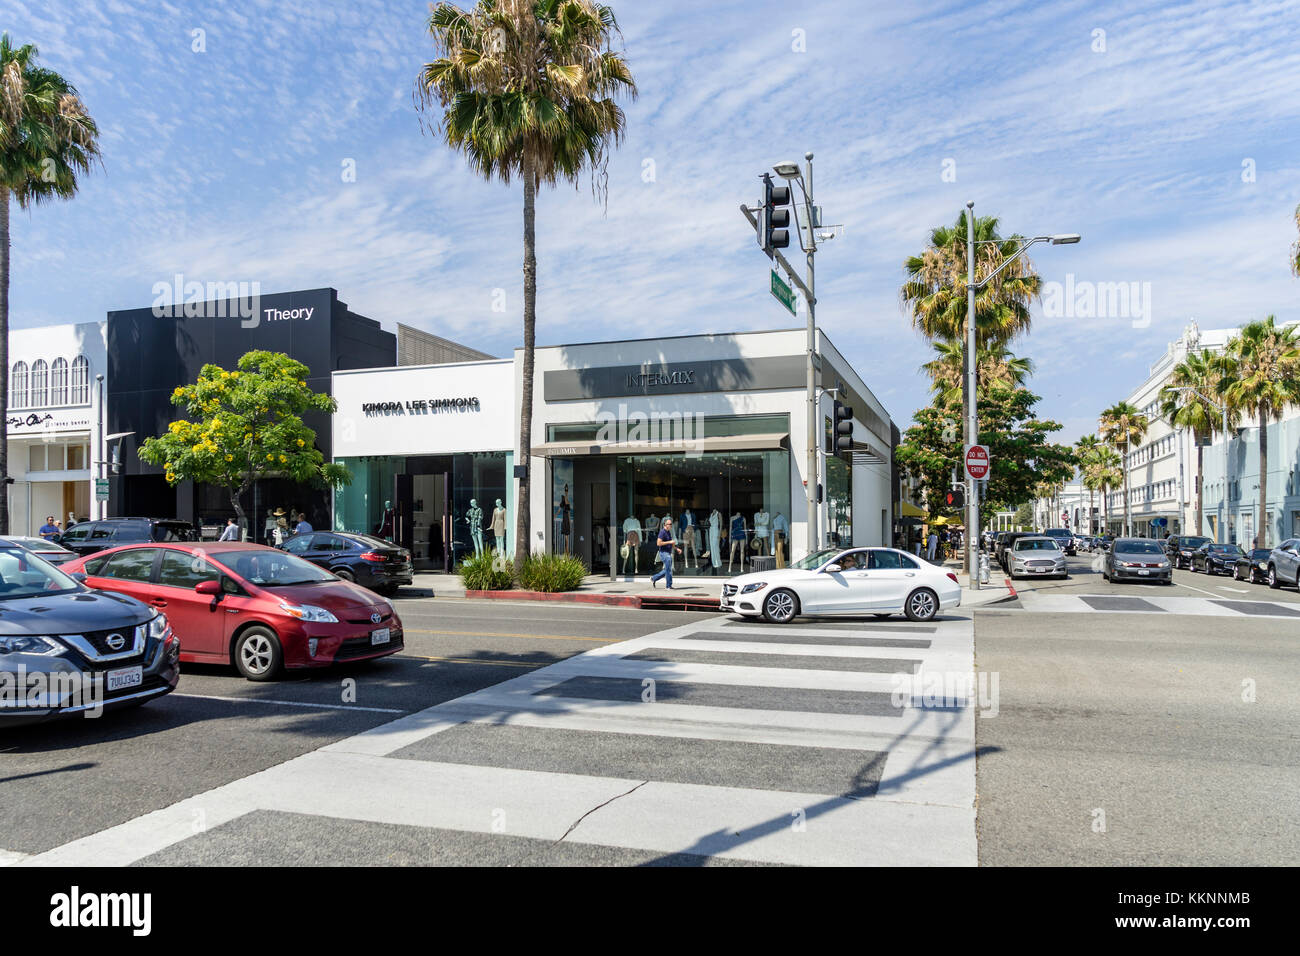 BEVERLY HILLS, CA/USA - OCTOBER 29, 2019: The distinctive Louis Vuitton  store on Rodeo Drive in Beverly Hills, one of the most expensive shopping  dist Stock Photo - Alamy